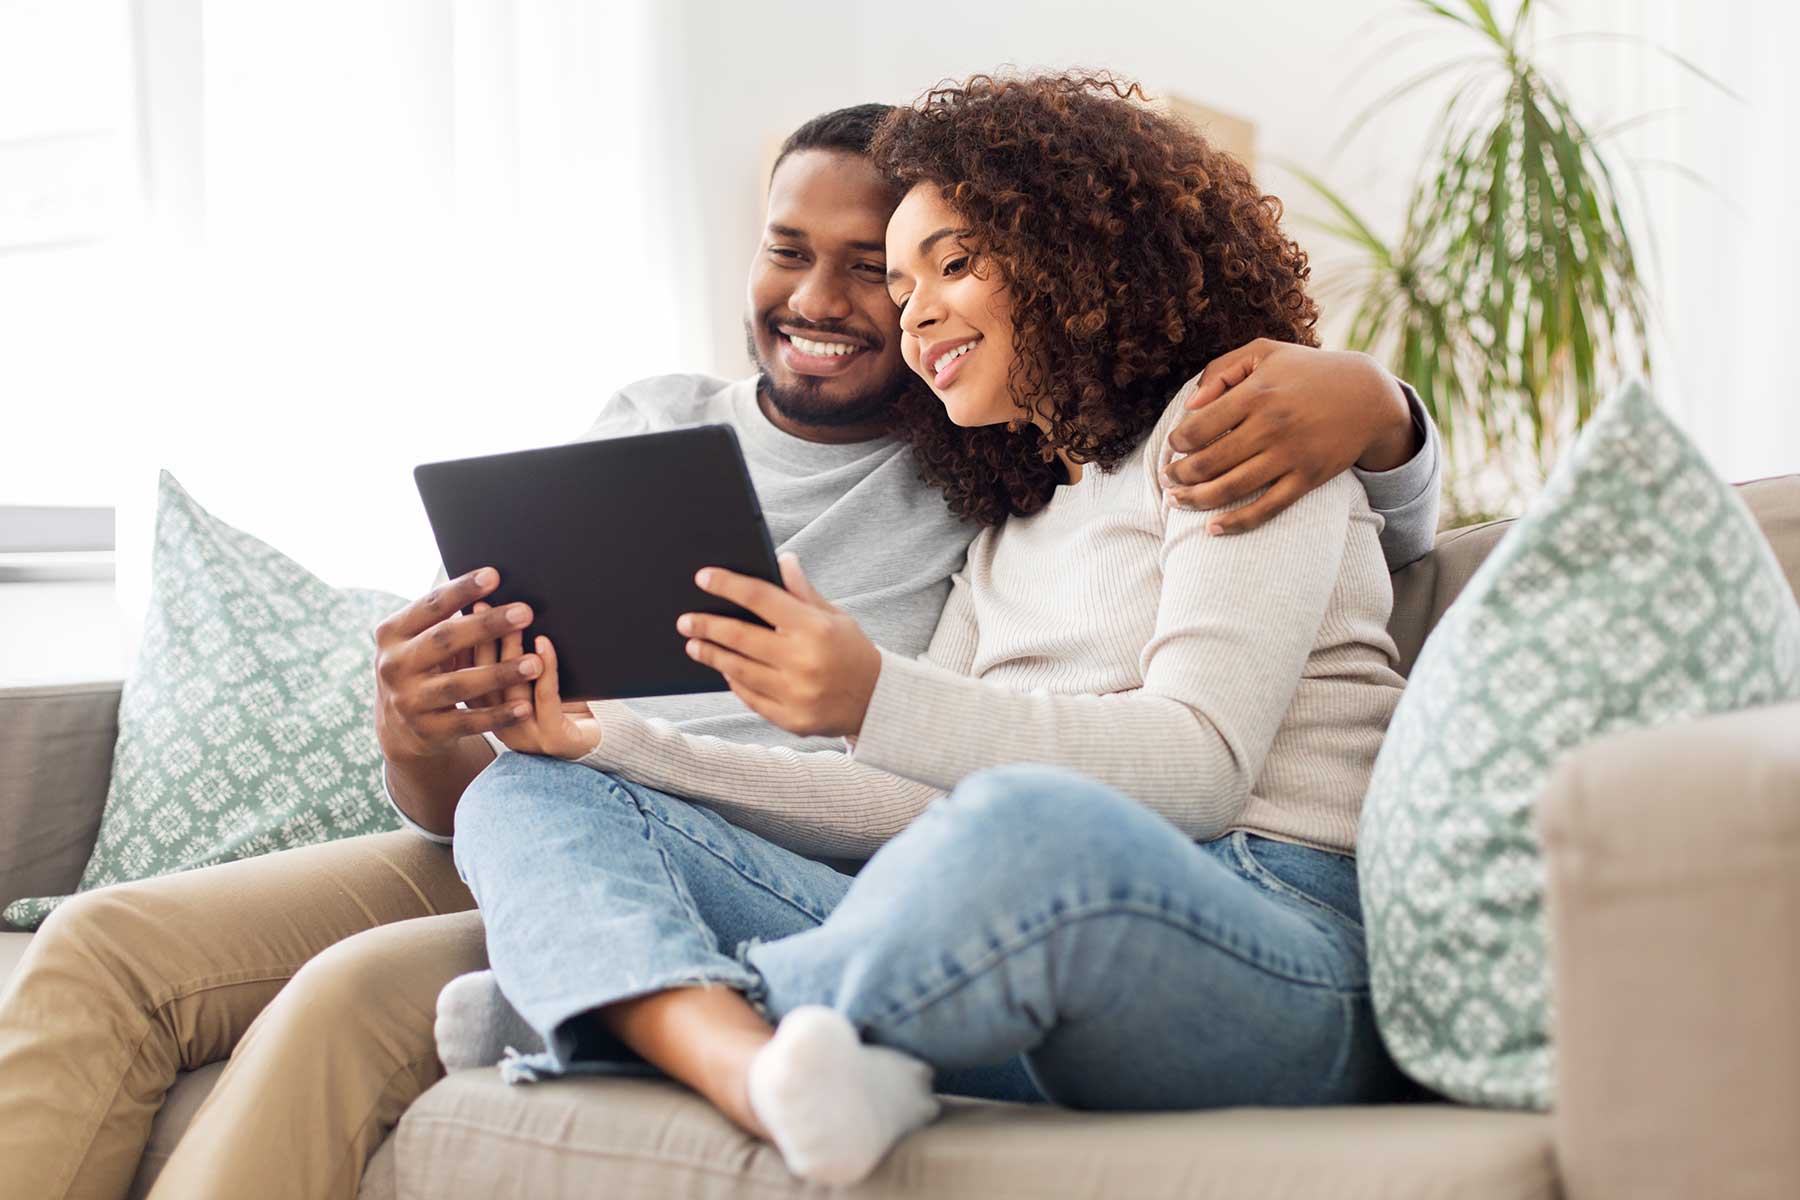 A couple sitting on a couch holding a tablet.